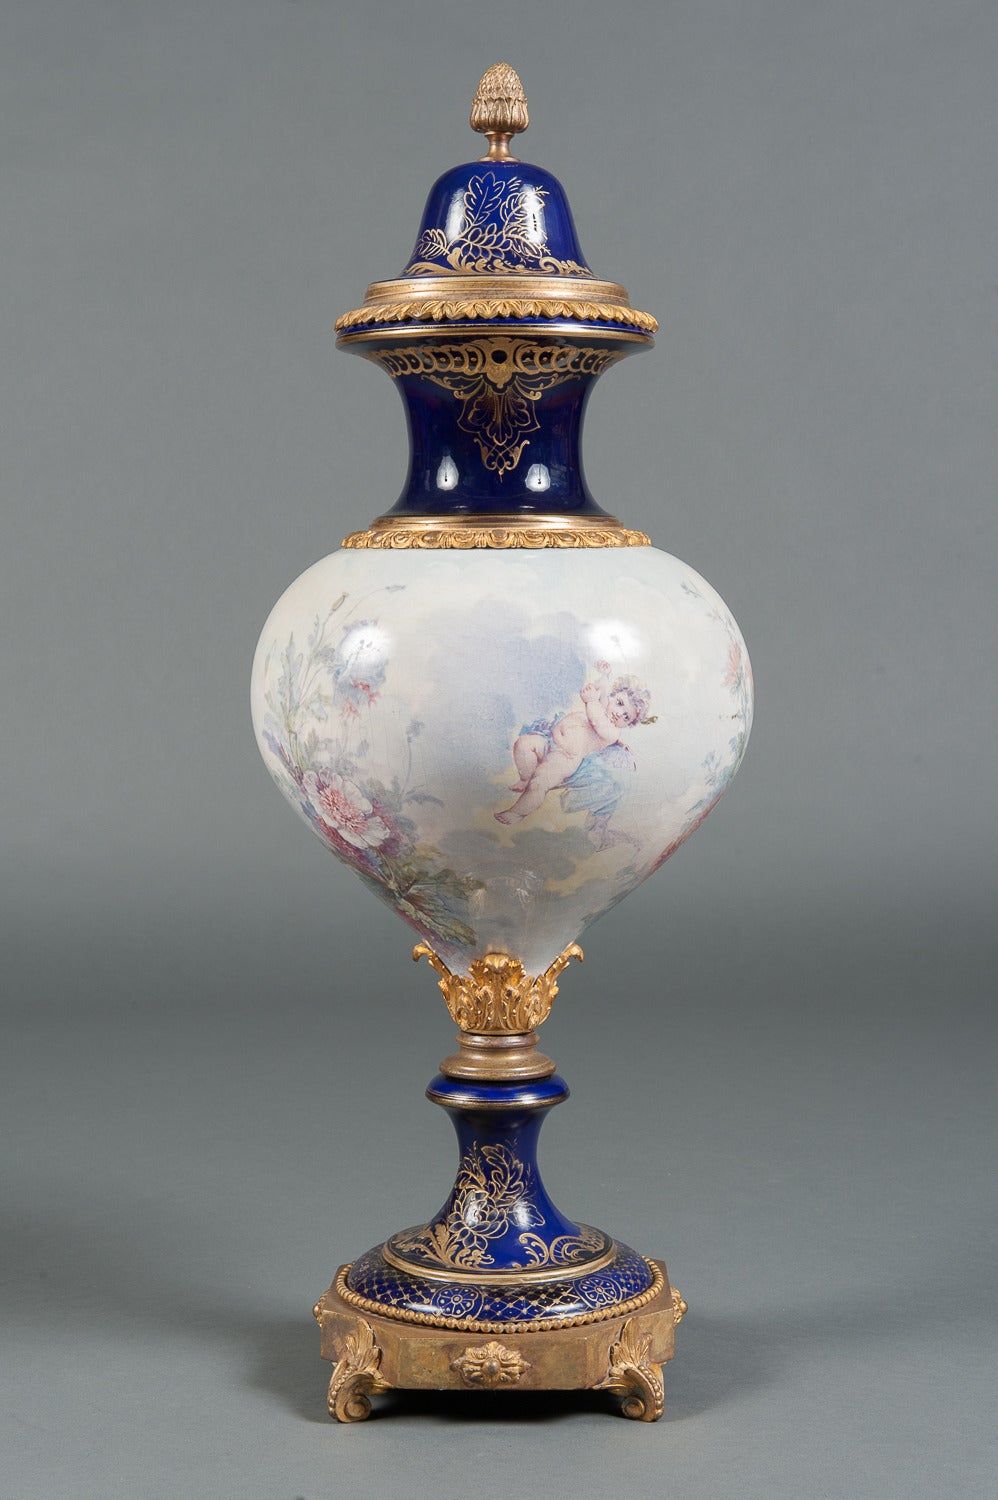 An Unique French Sevres Style Hand Painted Porcelain Lidded Vase

Circa 1890

Origin: France
 
Height: 30″  
Width: 11″
Depth: 11